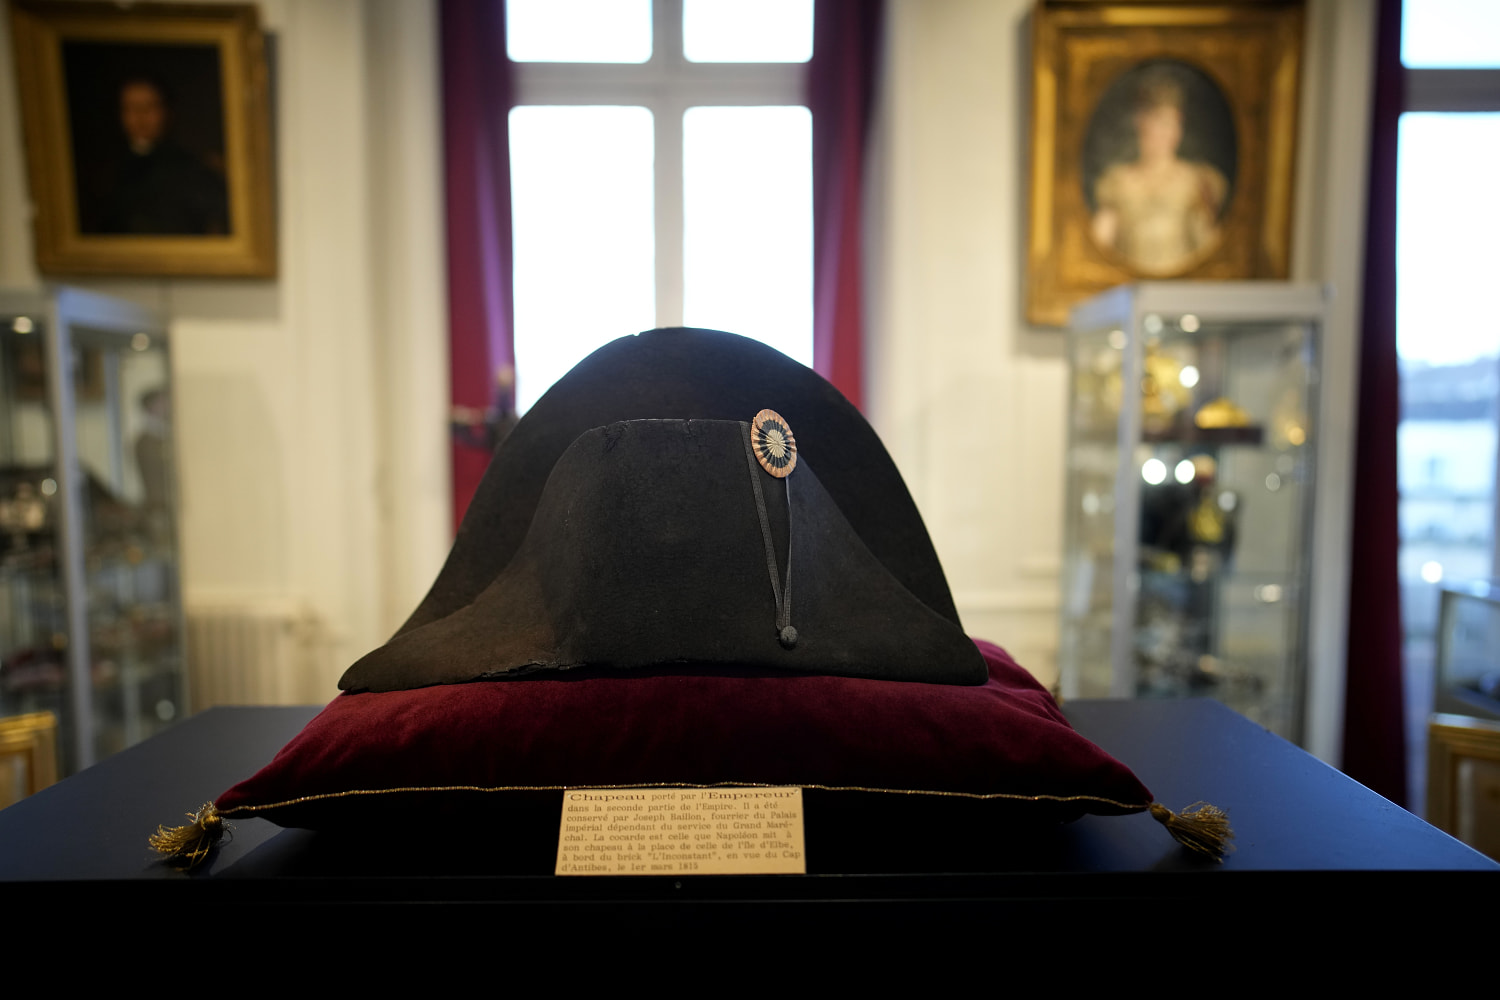 Hat worn by Napoleon sells for $2.1 million at auction of French emperor’s belongings